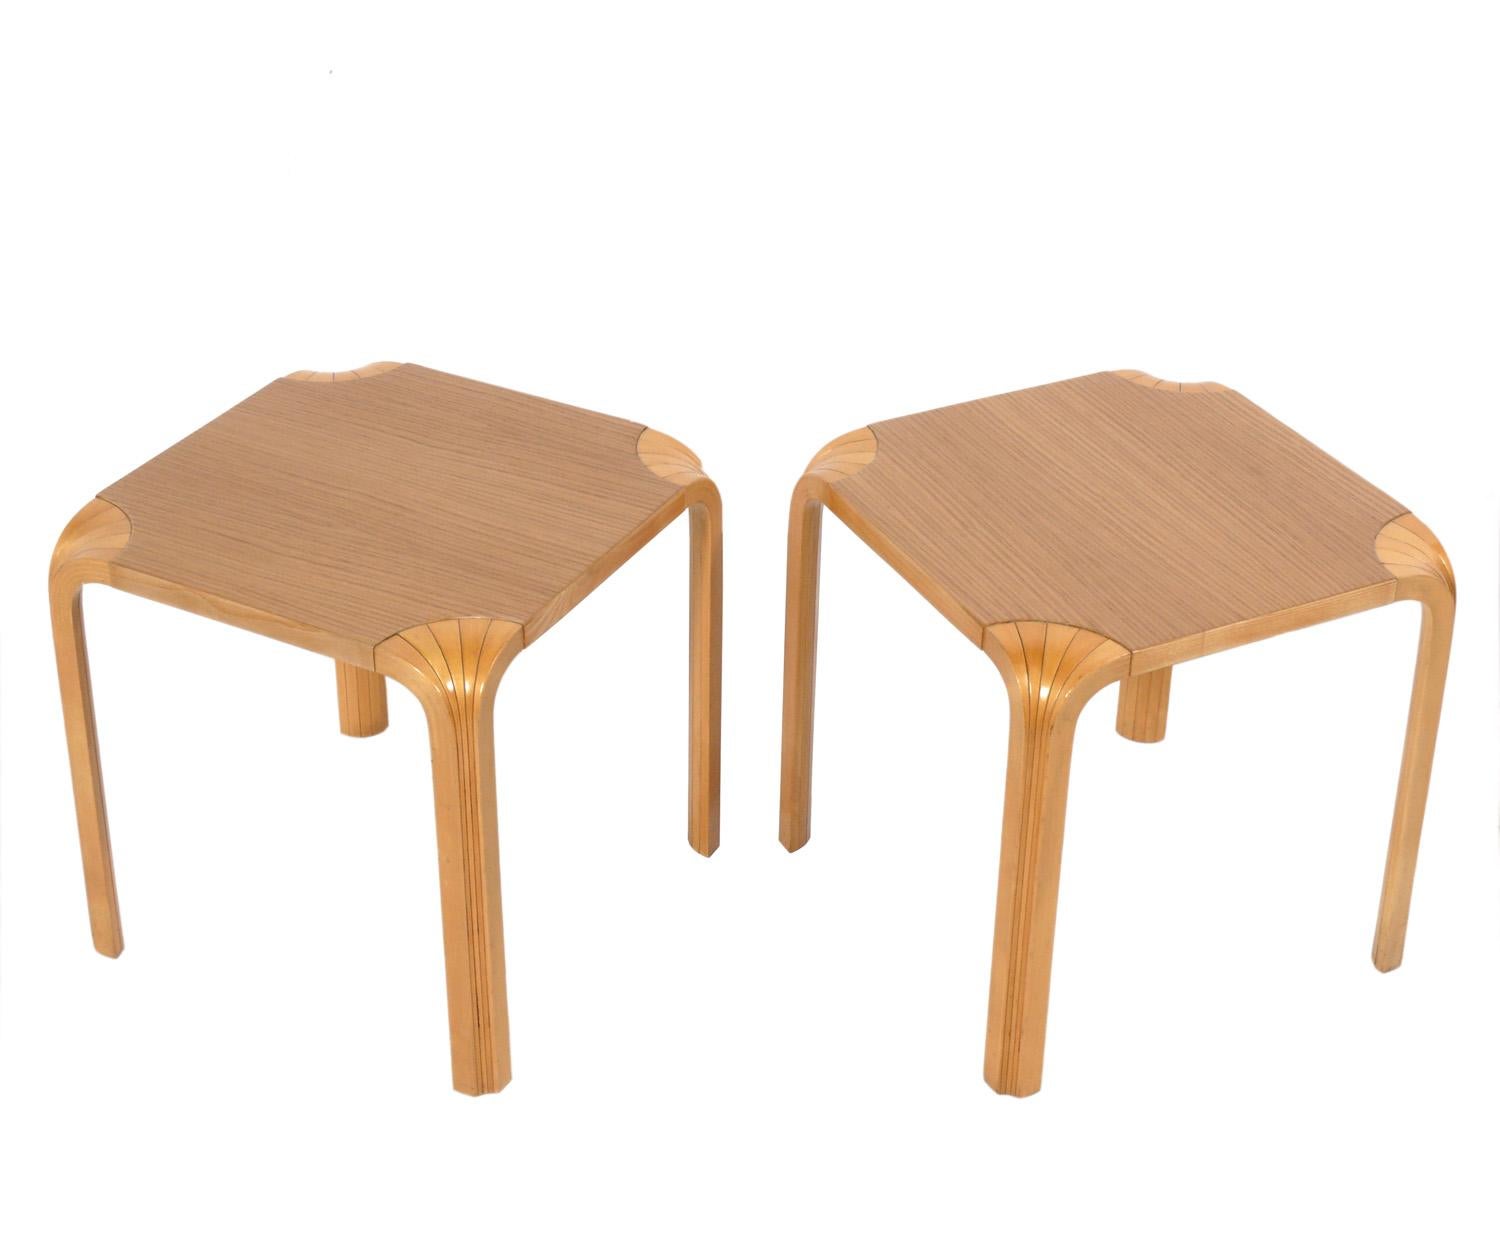 Pair of clean lined fan leg tables, designed by Alvar Aalto for Artek, Finland, circa 1980s. They are a versatile size and can be used as end or side tables, or as nightstands. The price noted below is for the pair of tables.